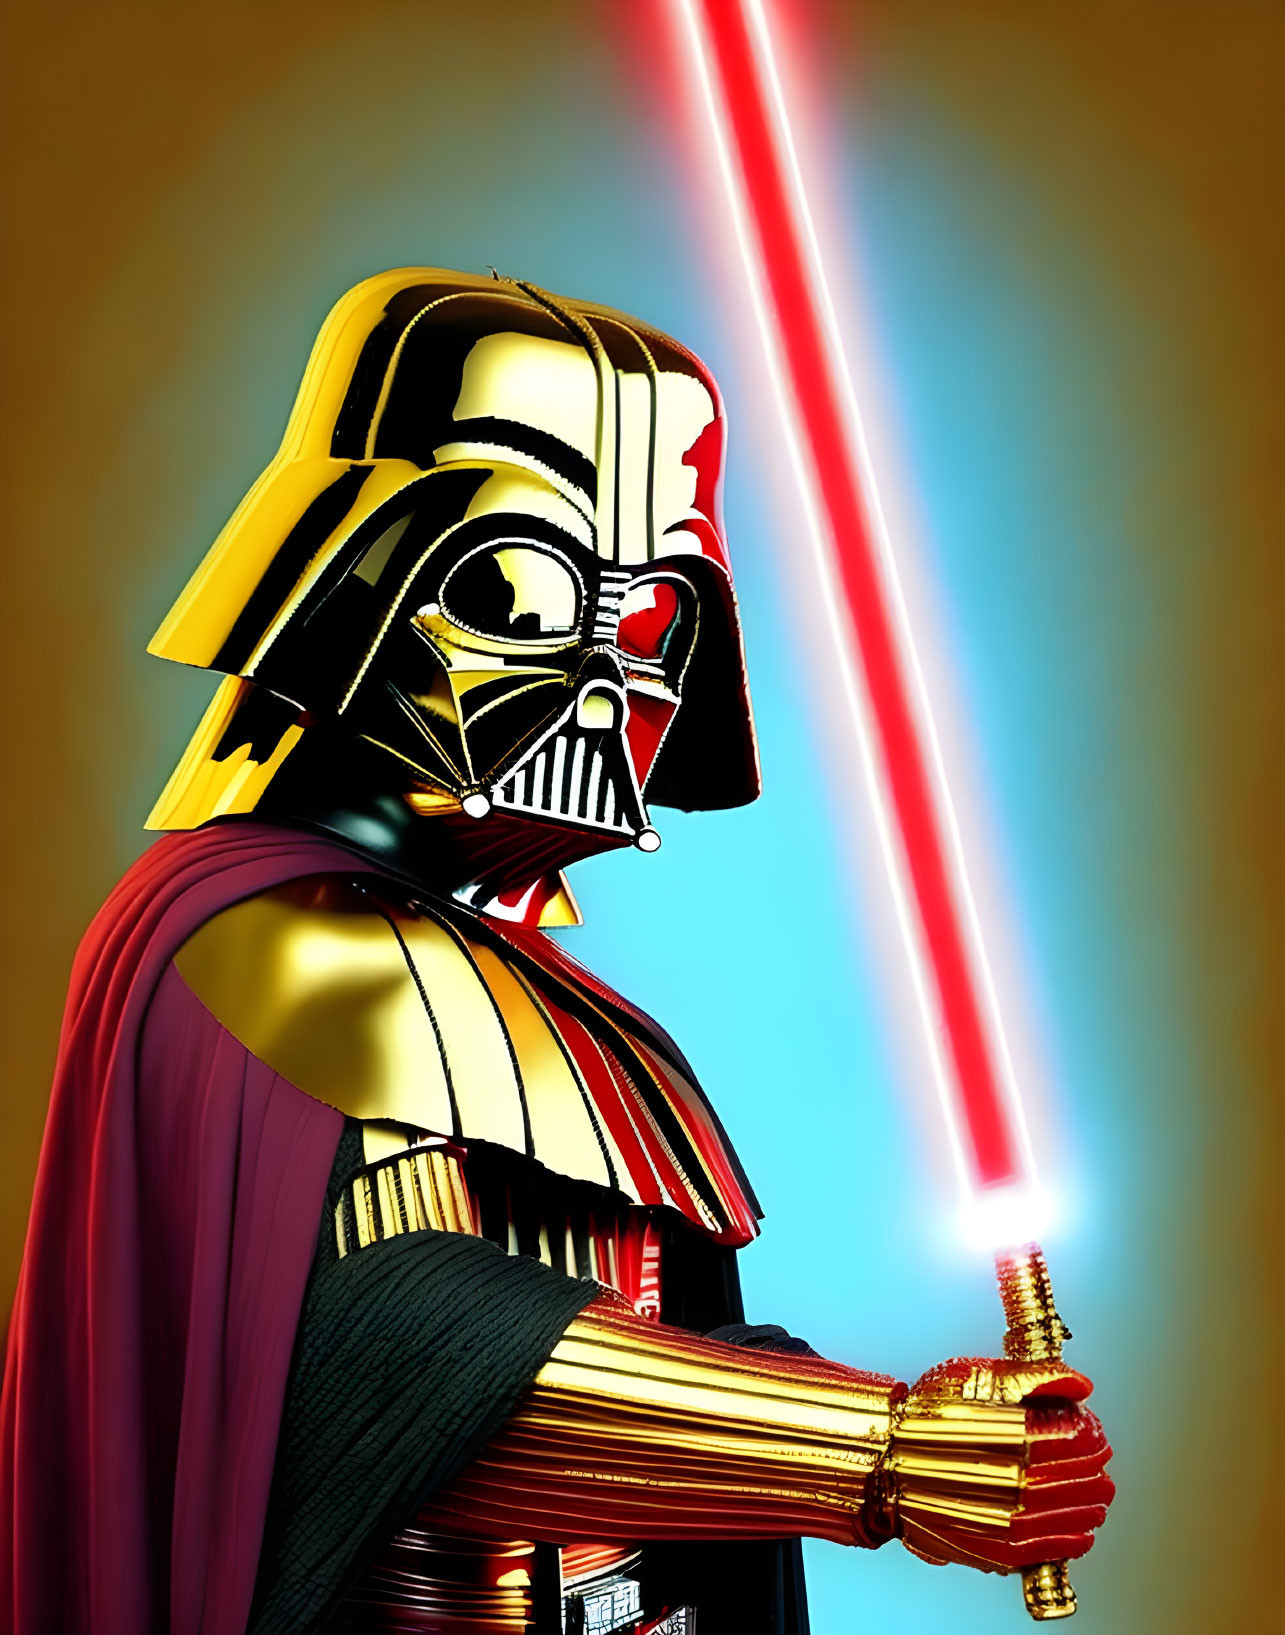 Stylized character with red lightsaber on gradient background